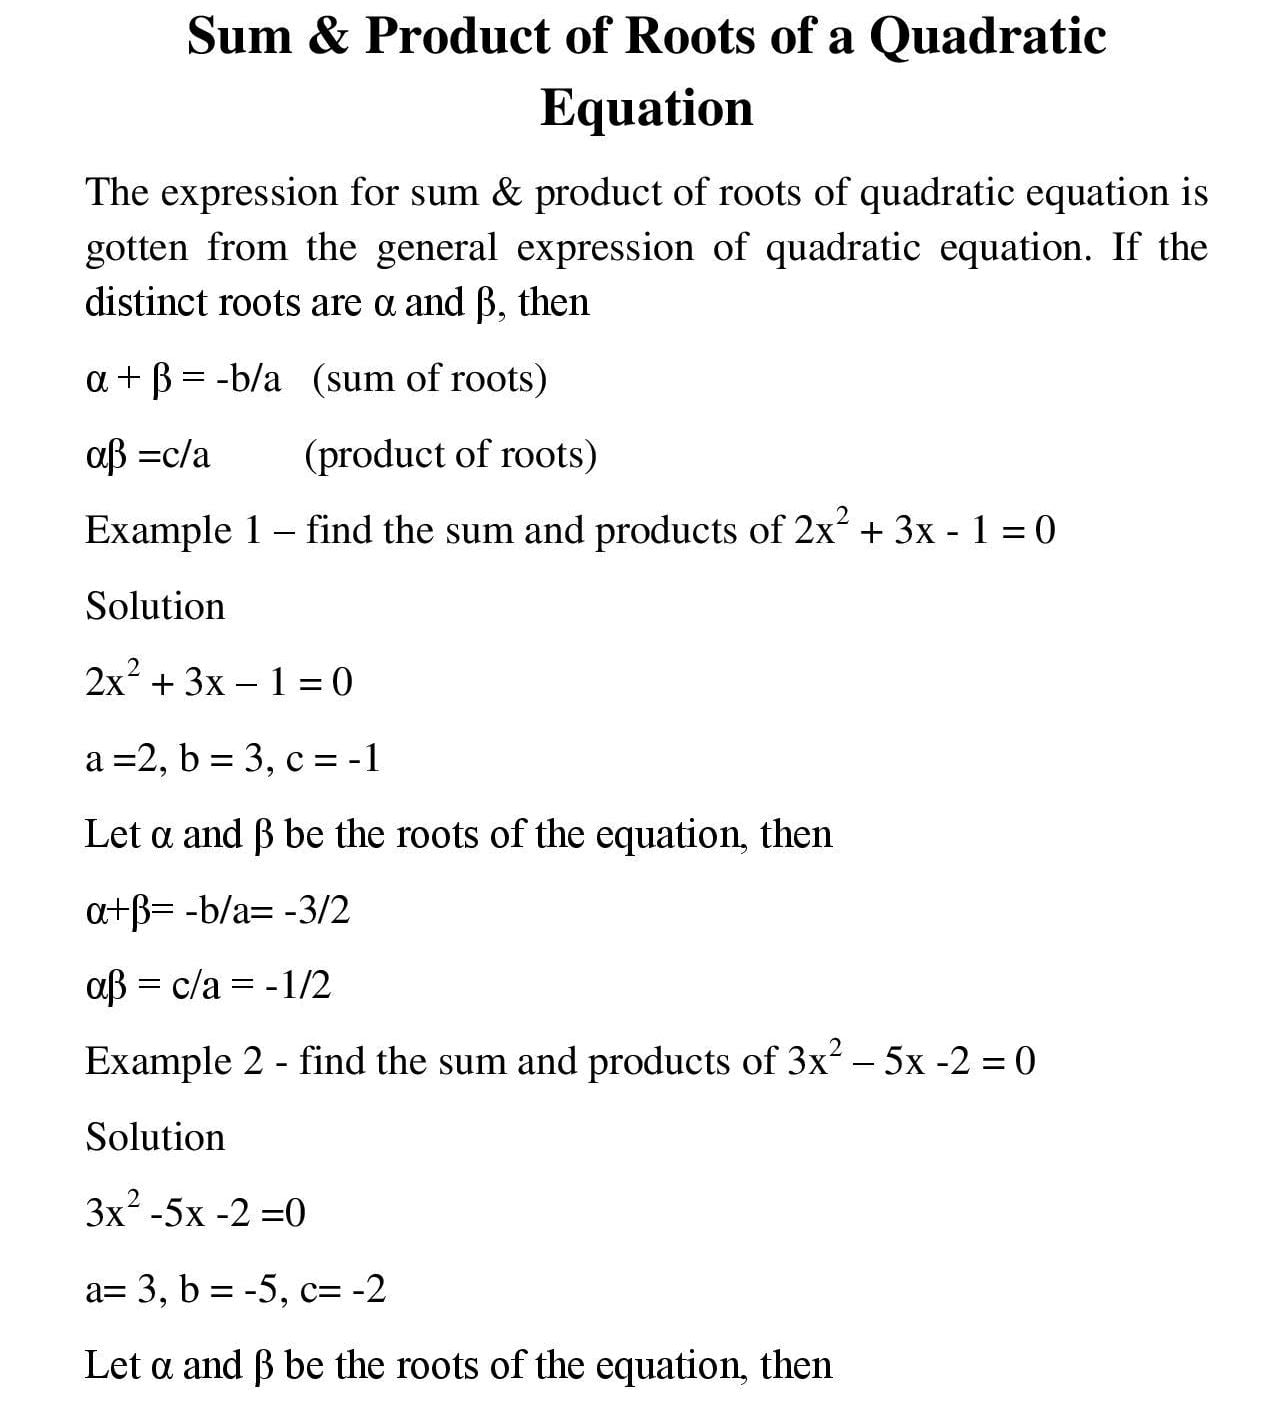 Sum & Product of Roots of a Quadratic Equation_1